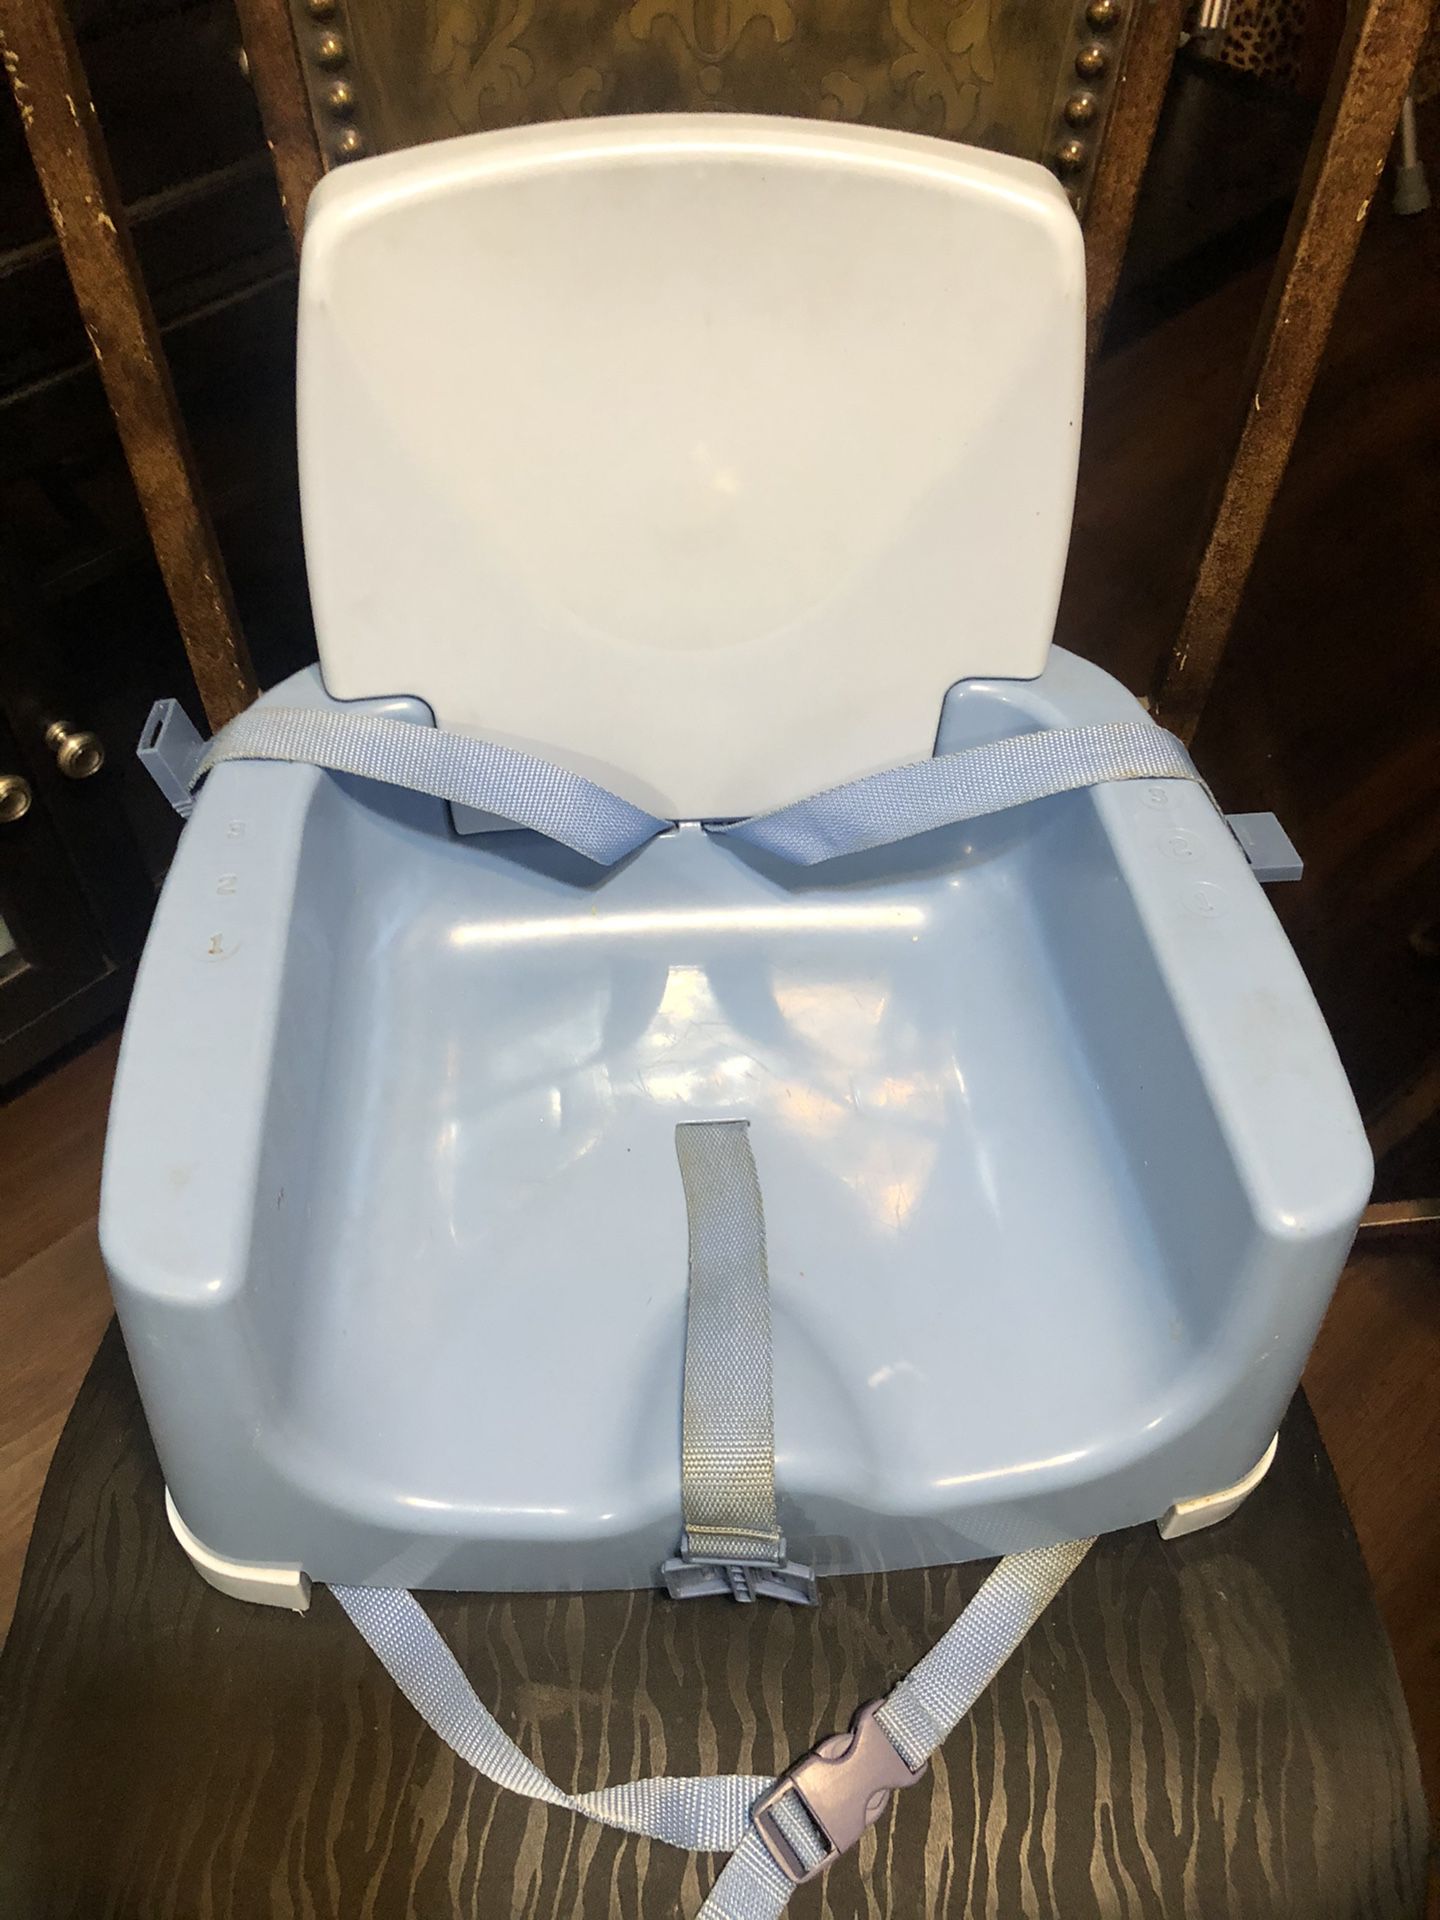 Blue Booster Seat $5